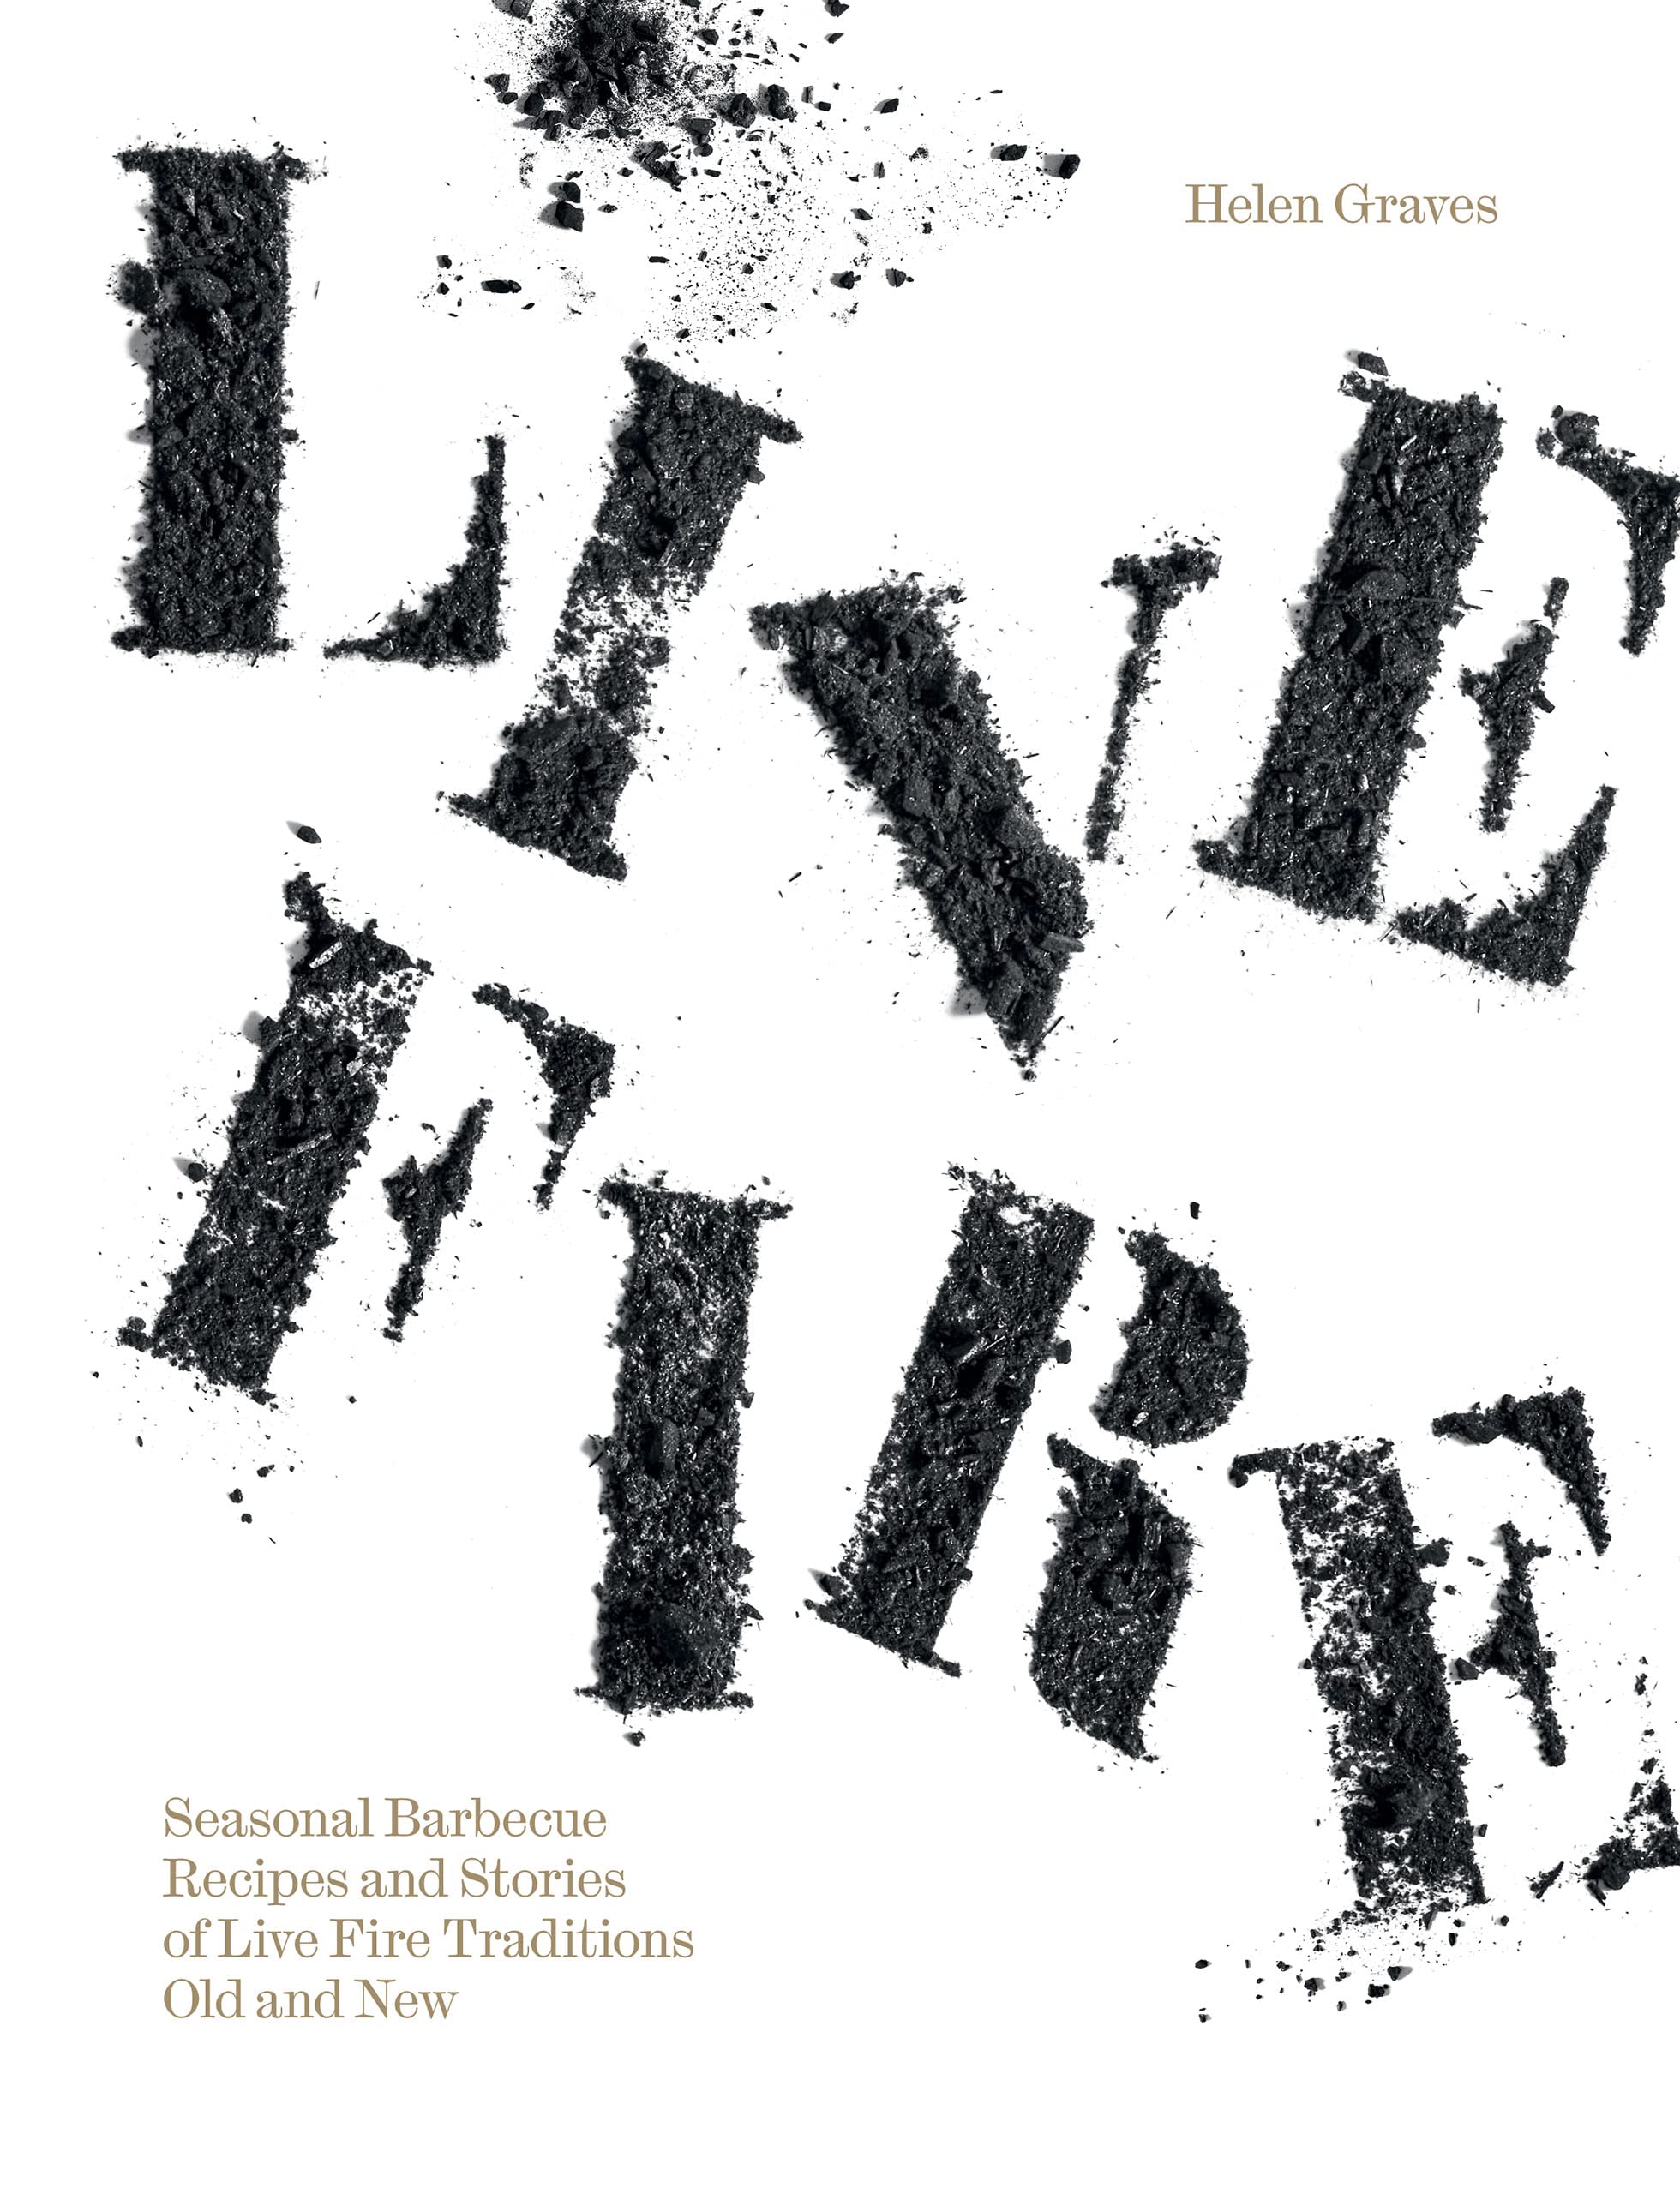 Live Fire: Seasonal Barbecue Recipes and Stories of Live Fire Traditions Old and New (Helen Graves)